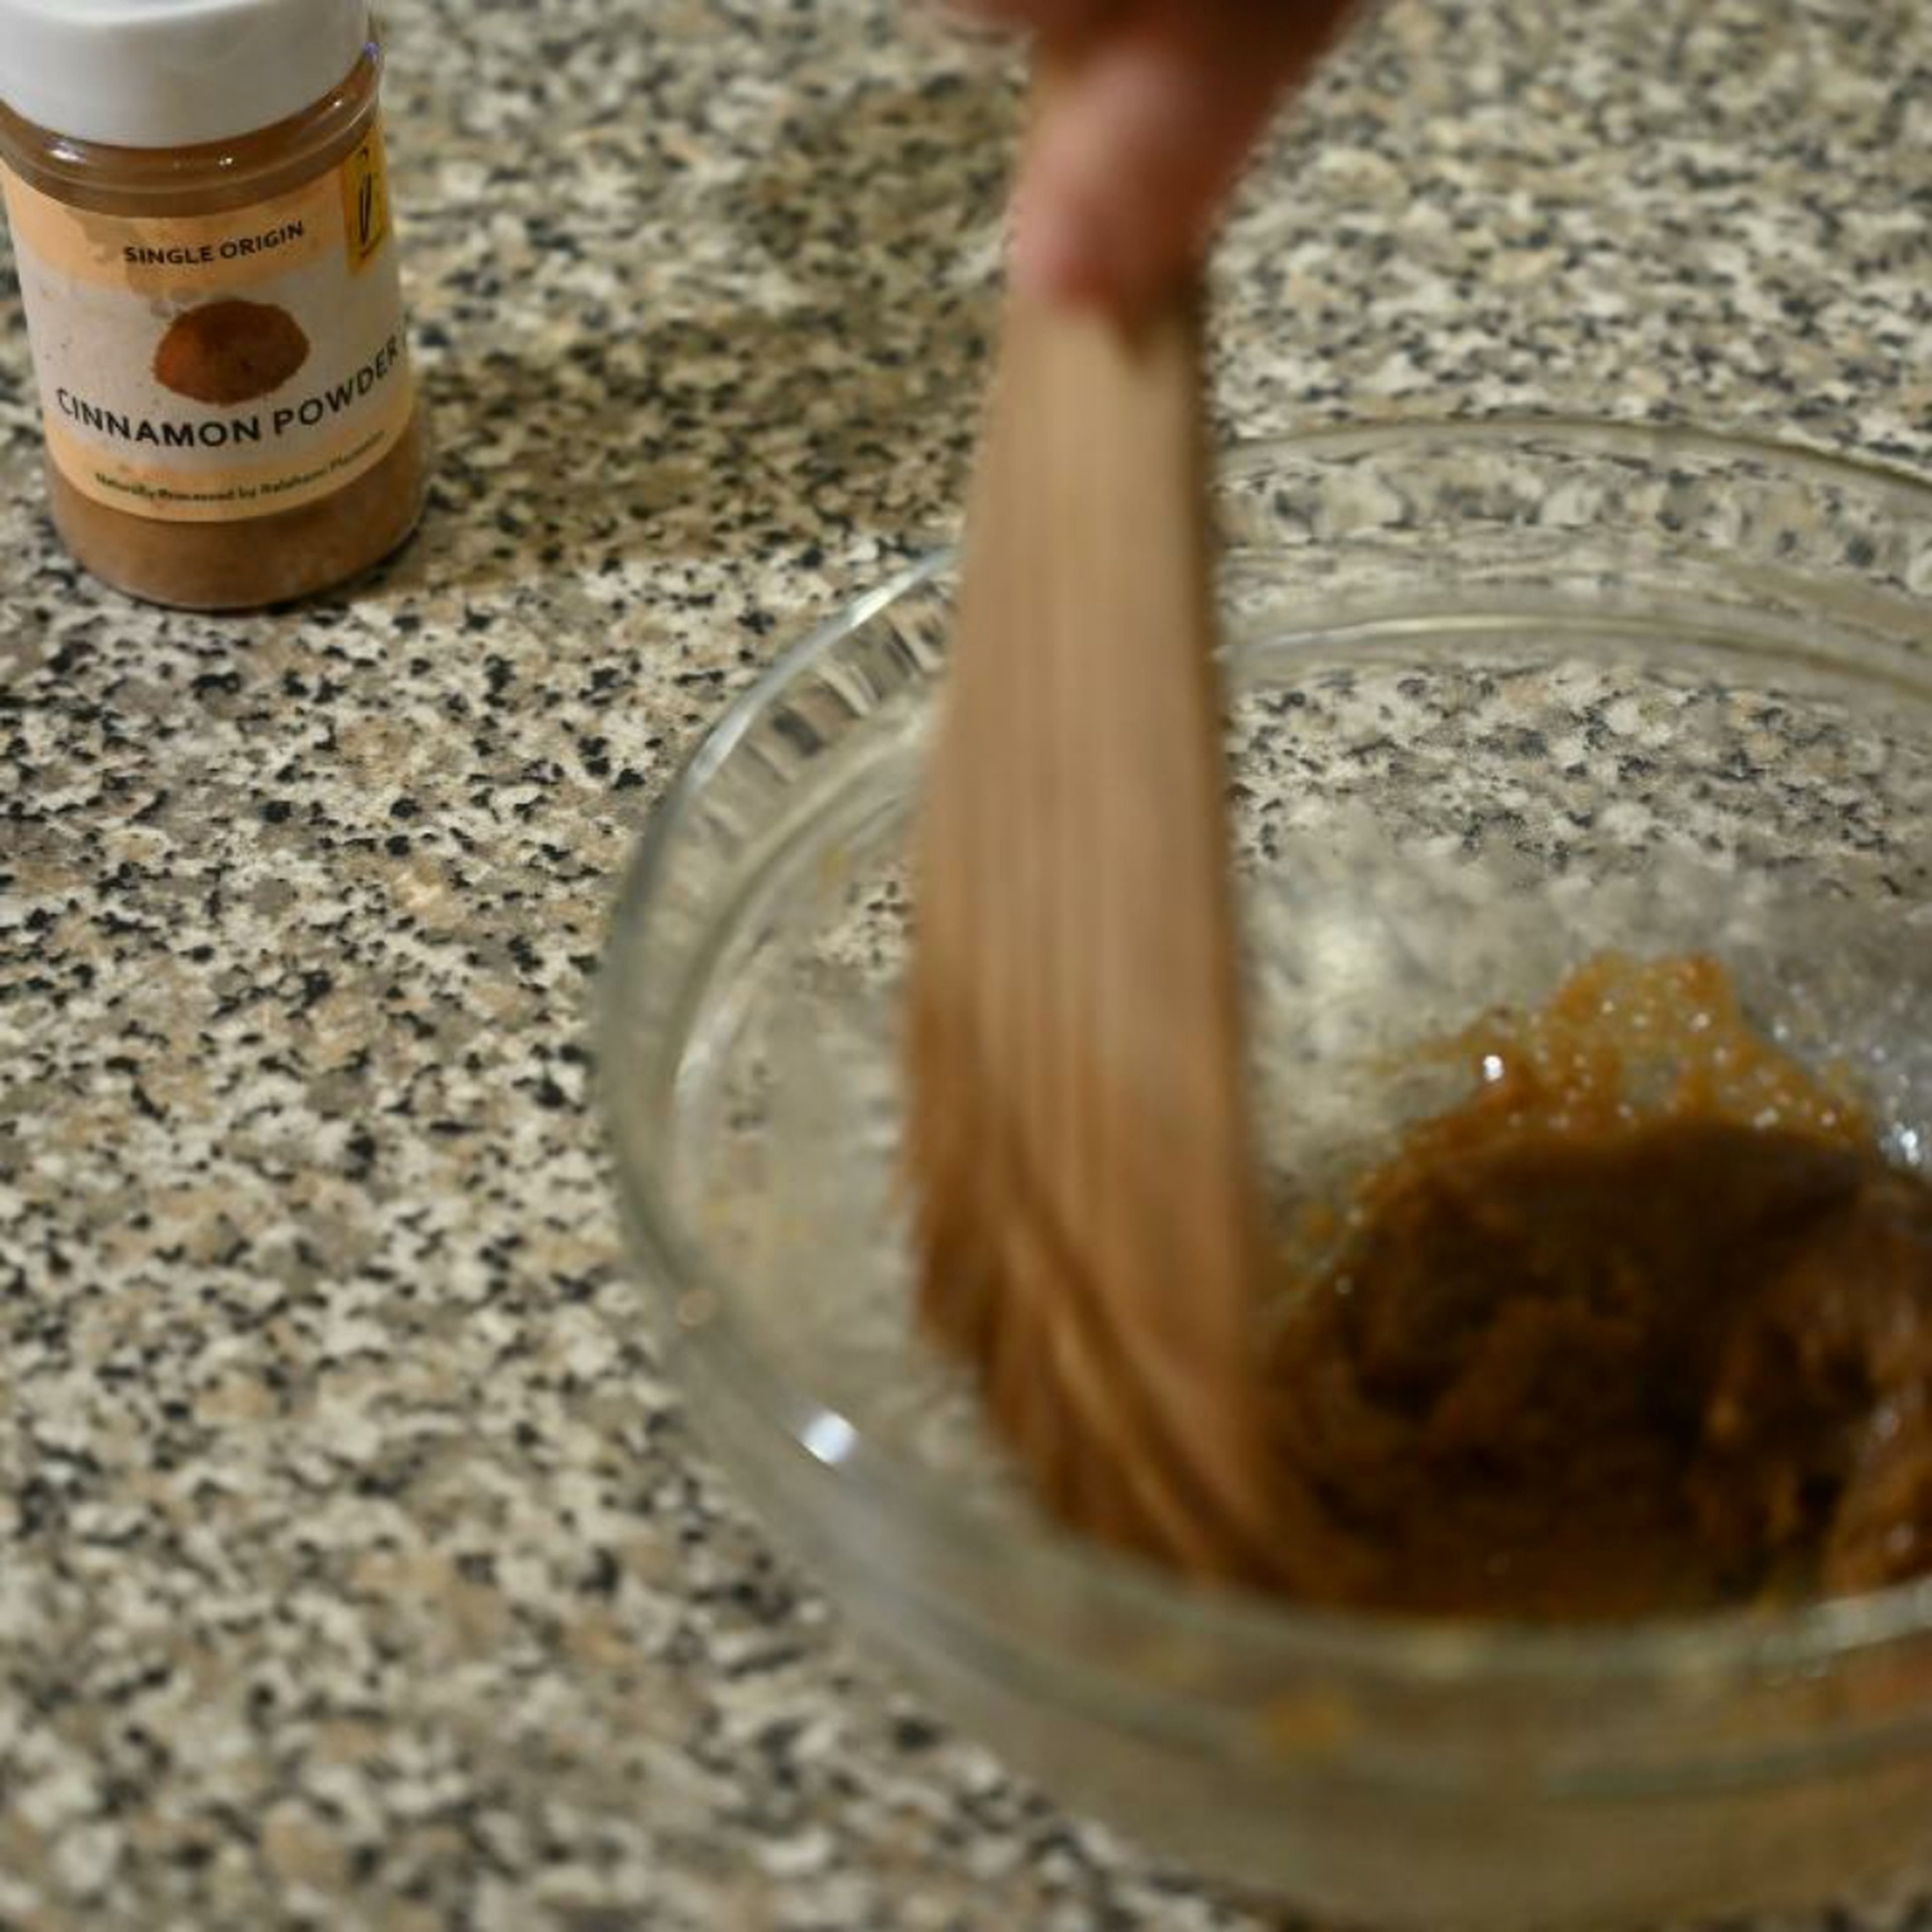 In a small bowl, combine together margarine, brown sugar and Cinnamon powder.